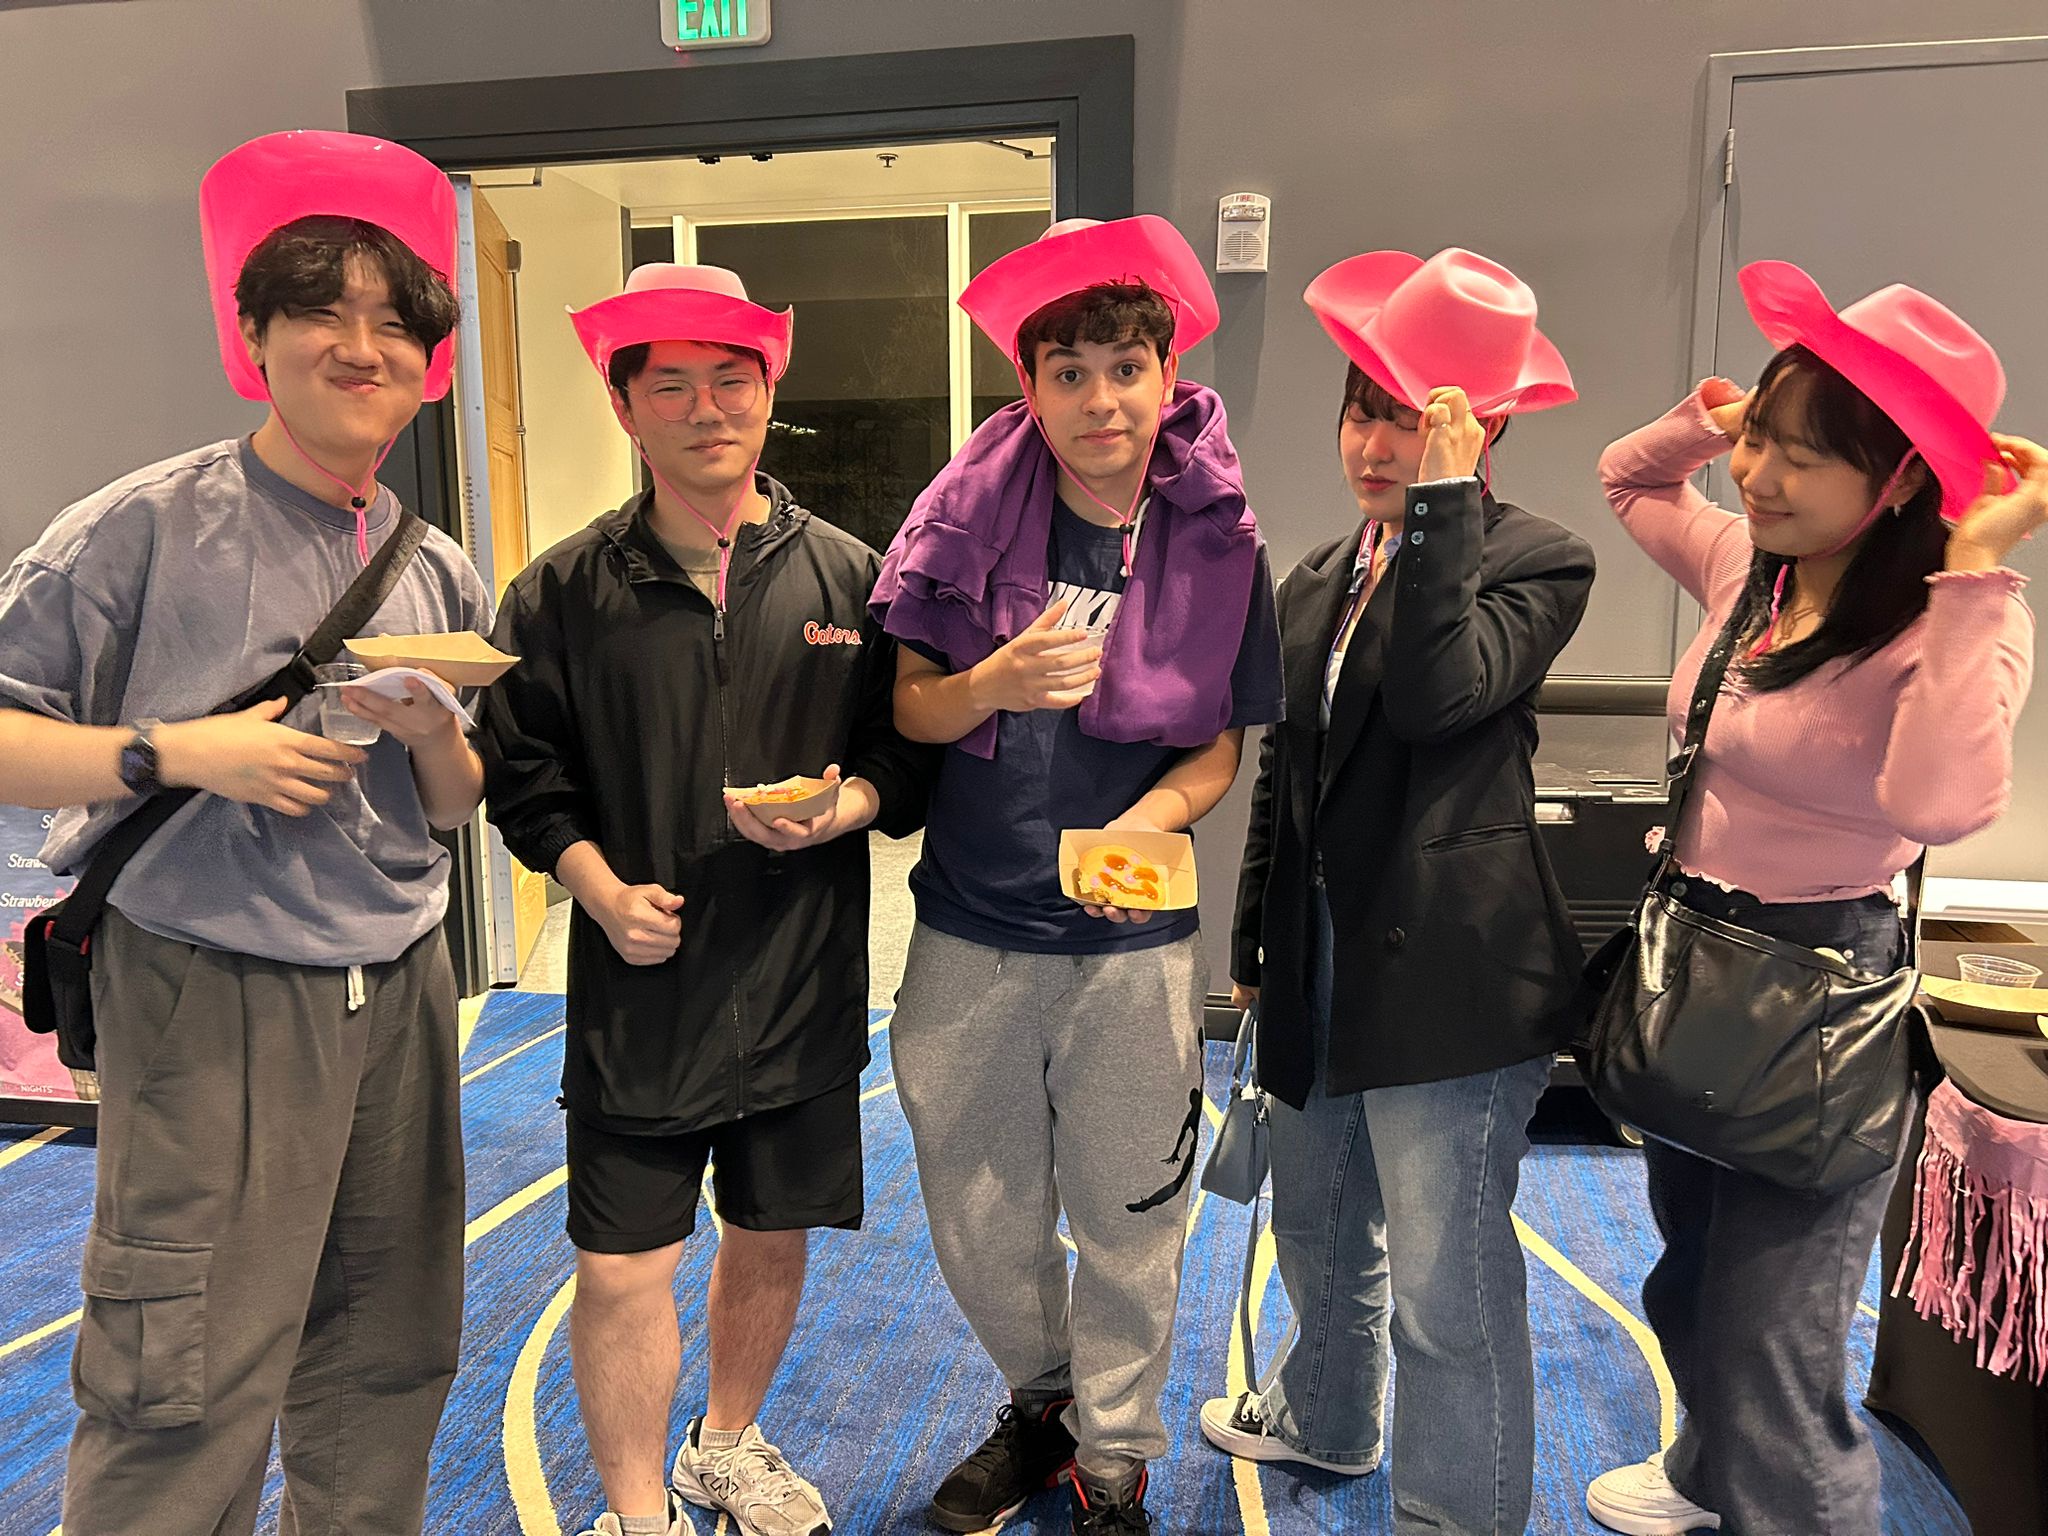 A group of students eating pizza and wearing pink cowboy hats.